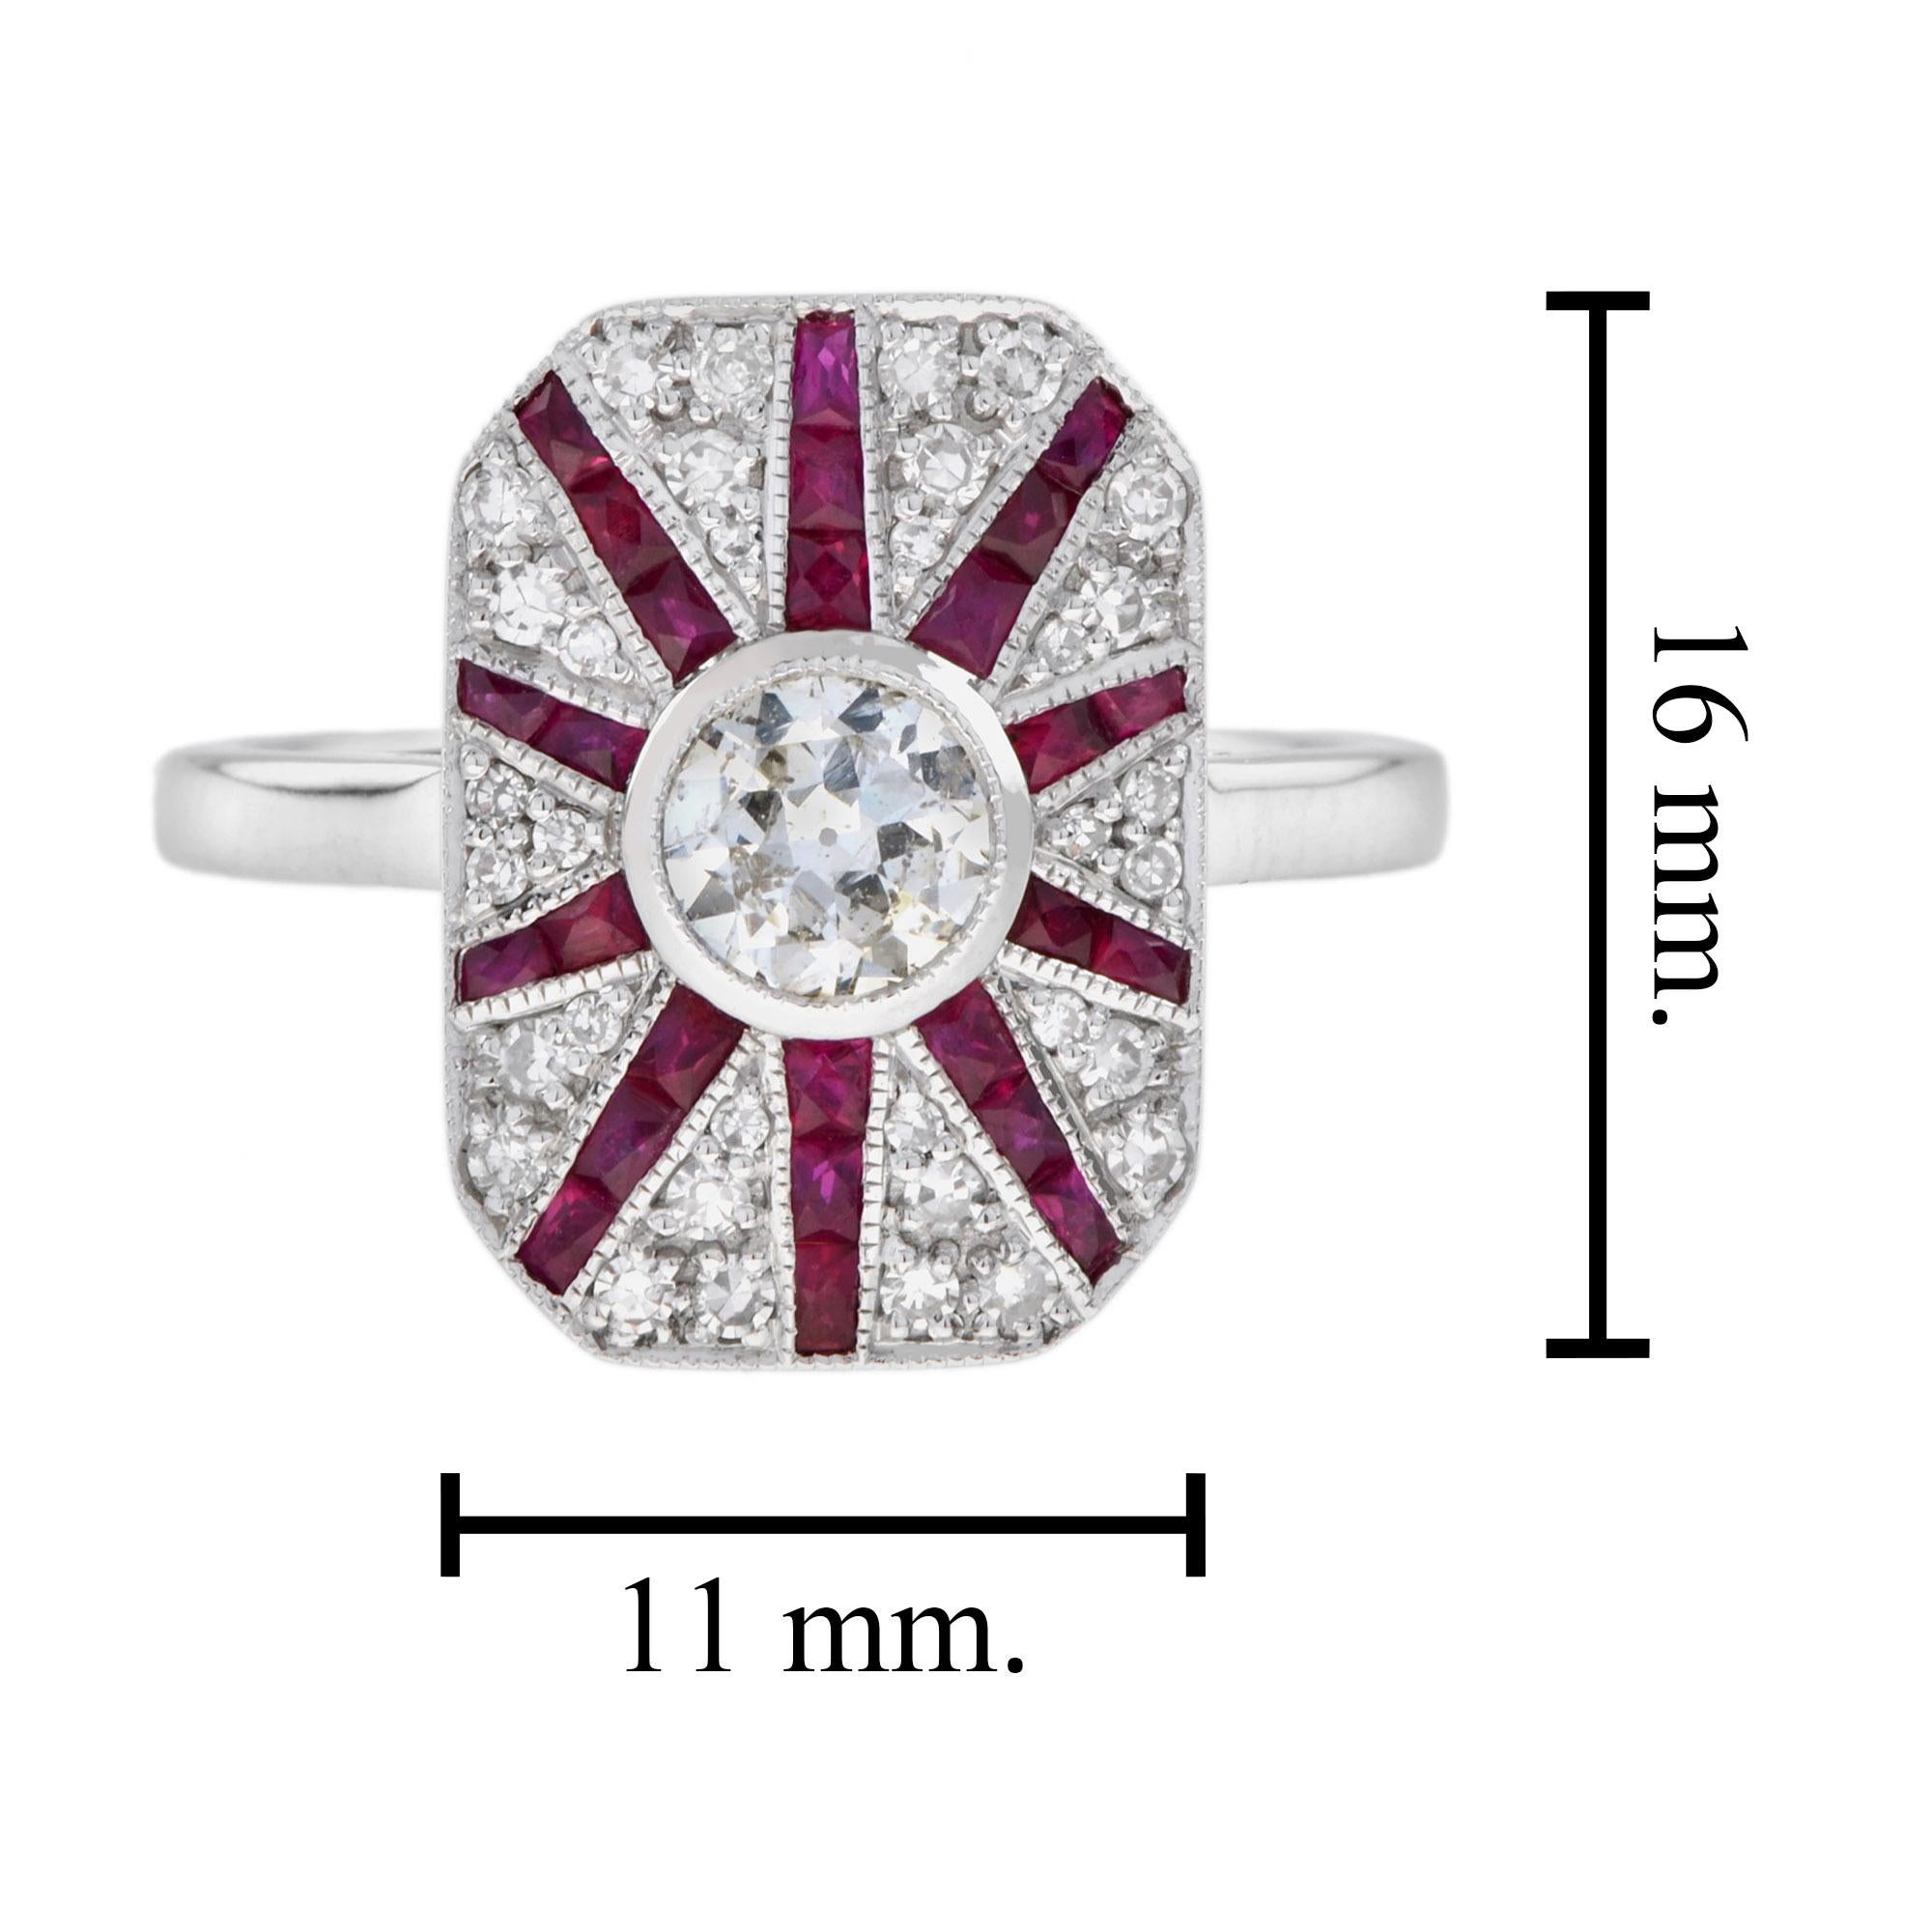 Women's Old Cut Diamond and Ruby Art Deco Style Halo Ring in 18k White Gold